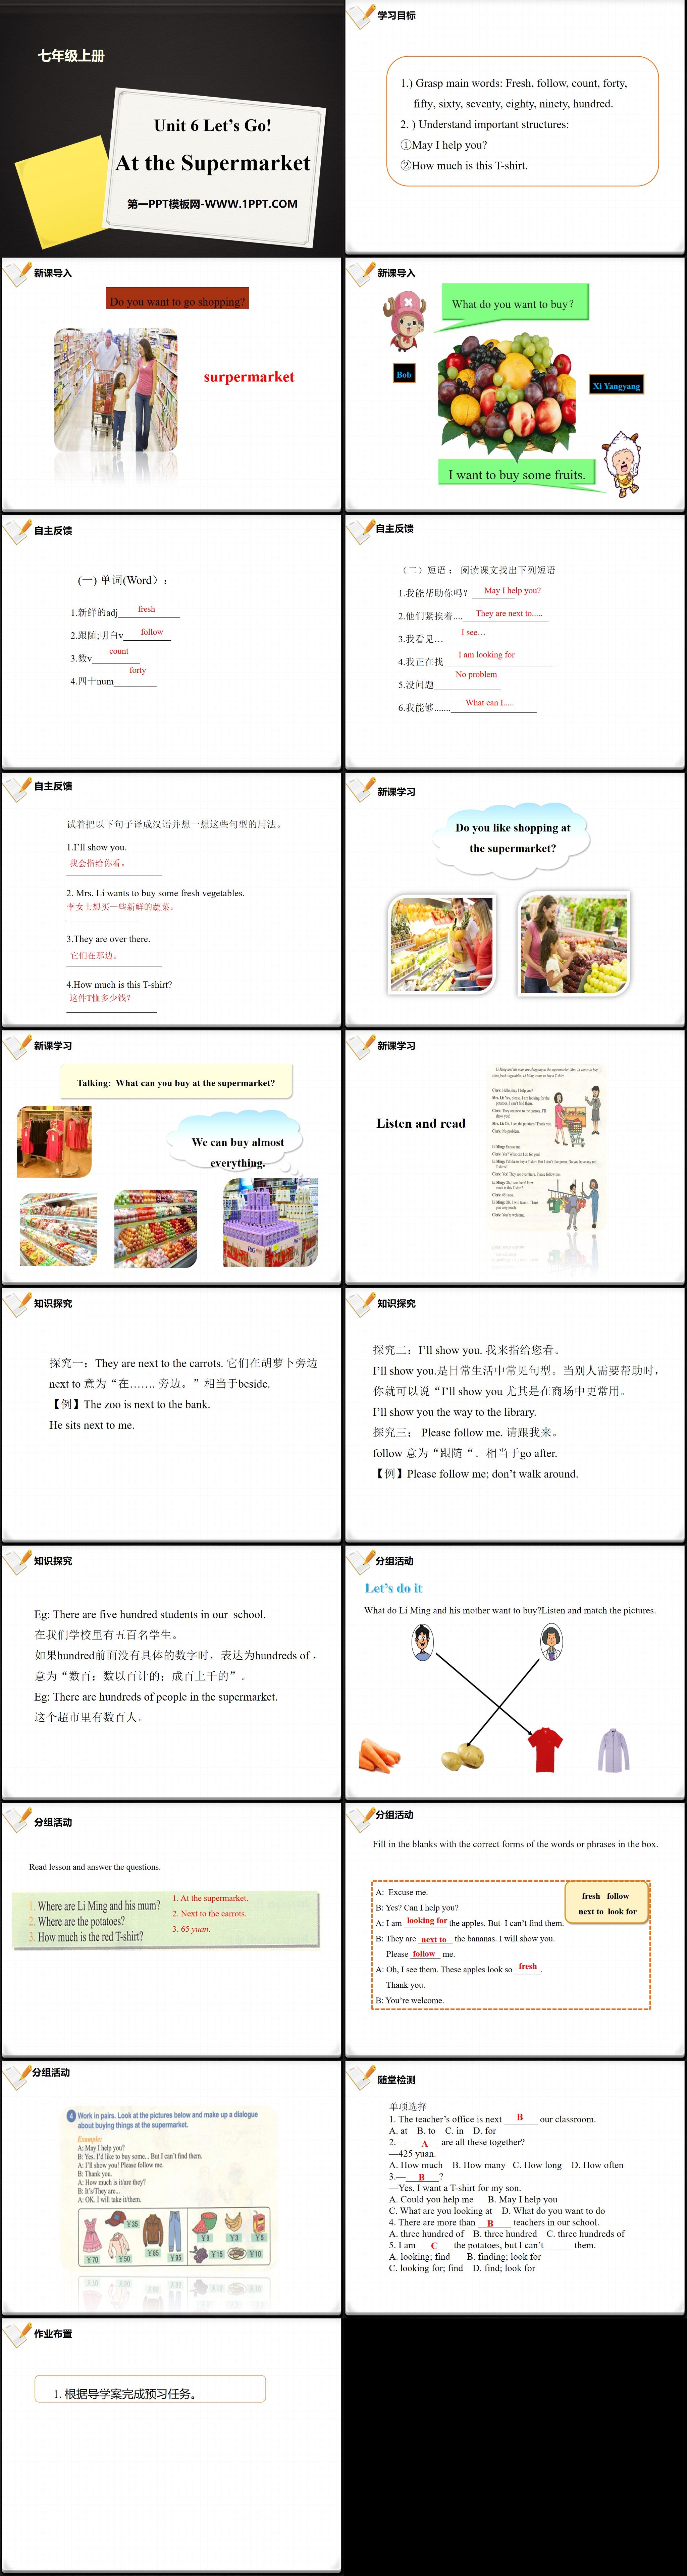 《At the Supermarket》Let's Go! PPT
（2）